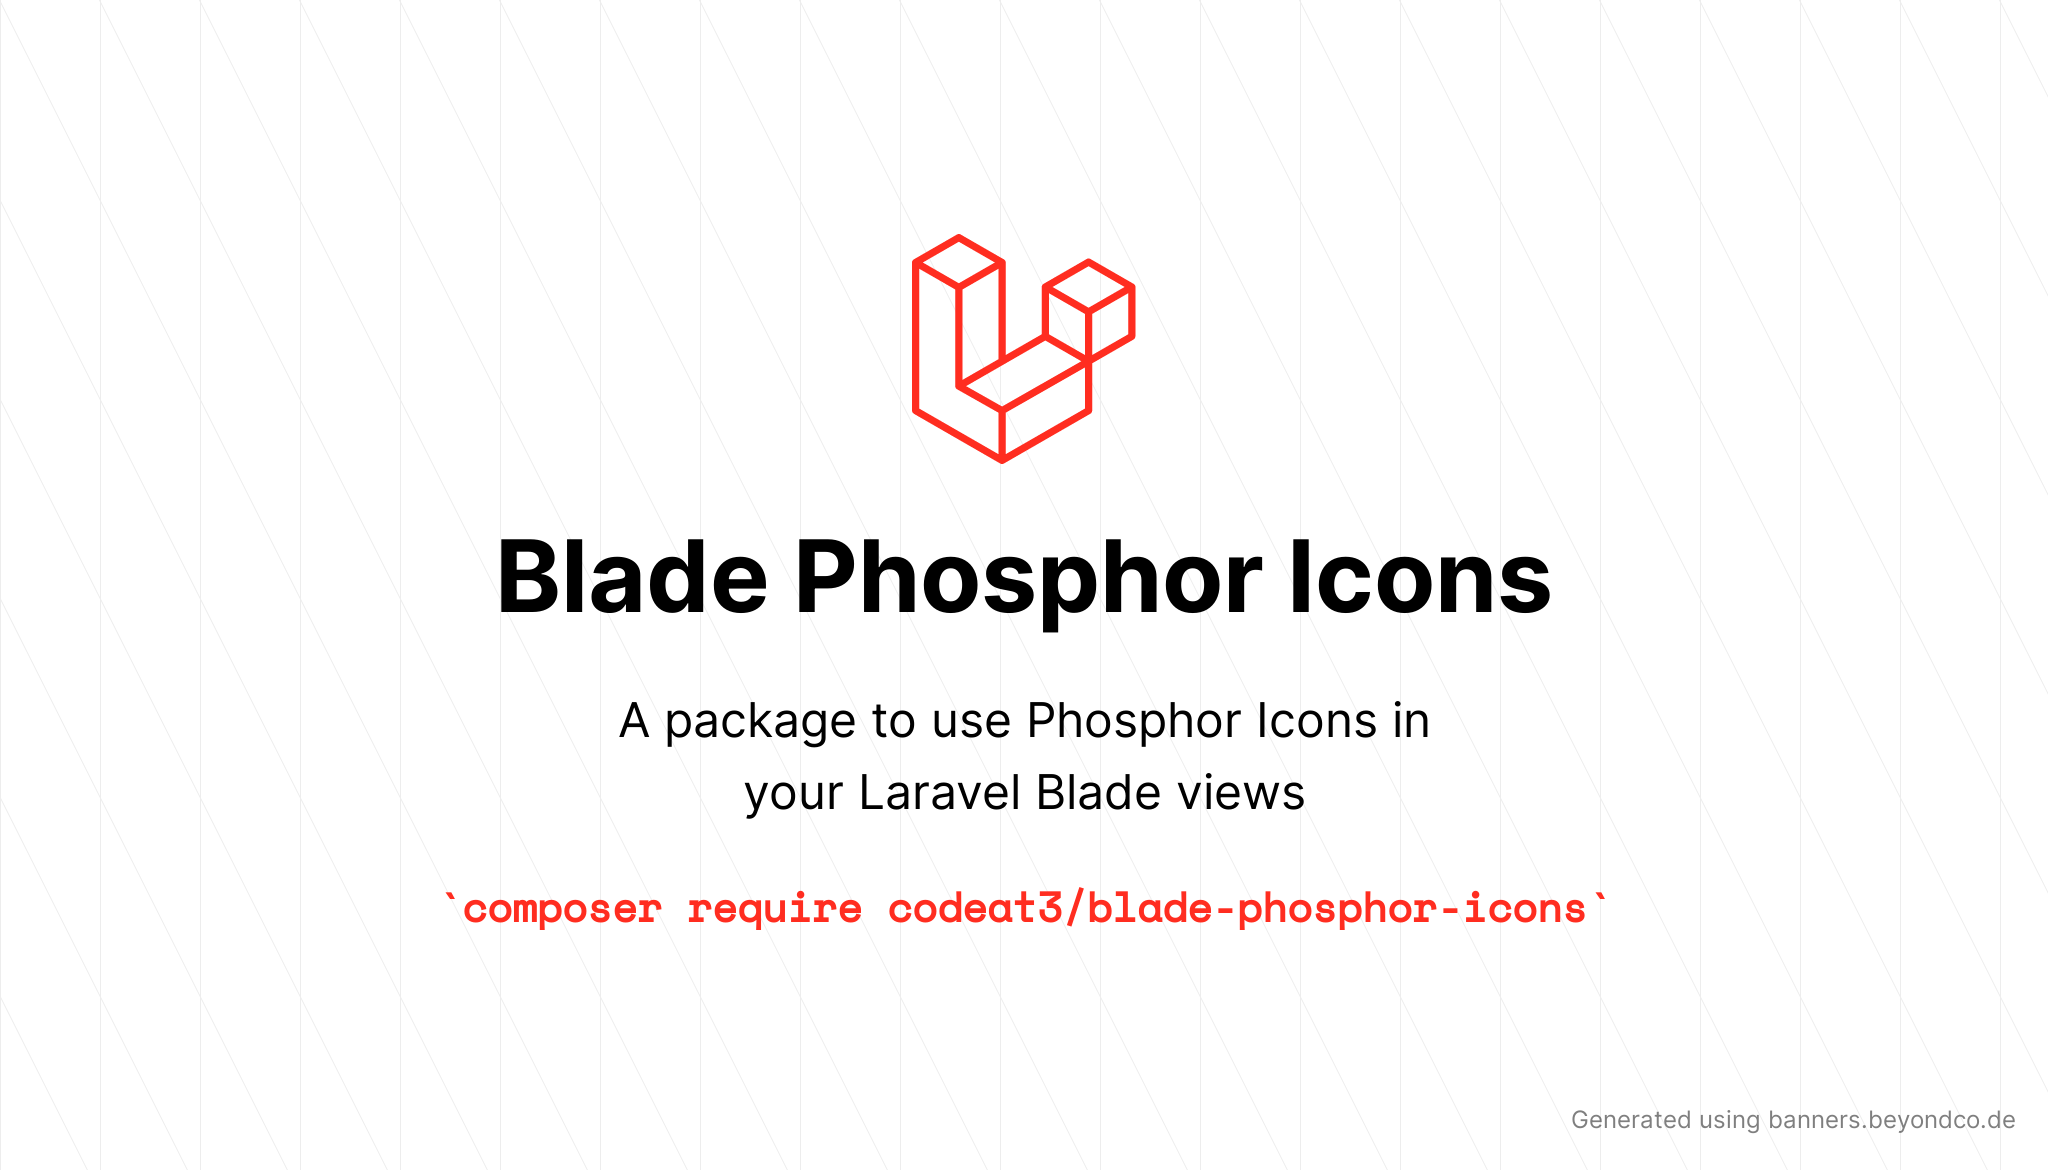 socialcard-blade-phosphor-icons.png